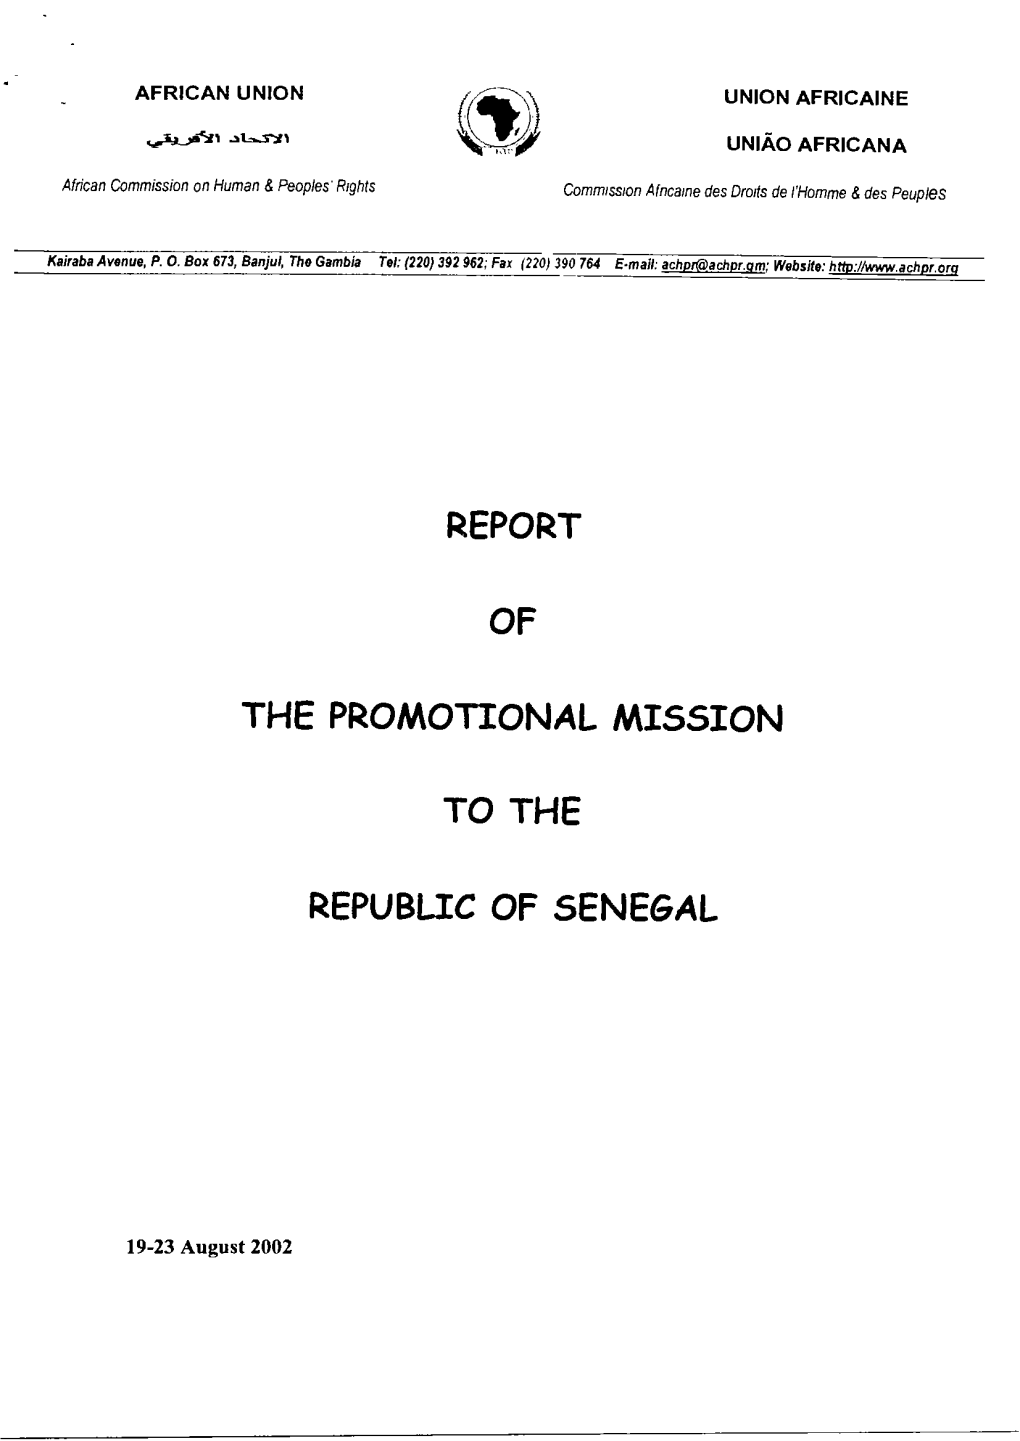 Report of the Promotional Mission to the Republic Of